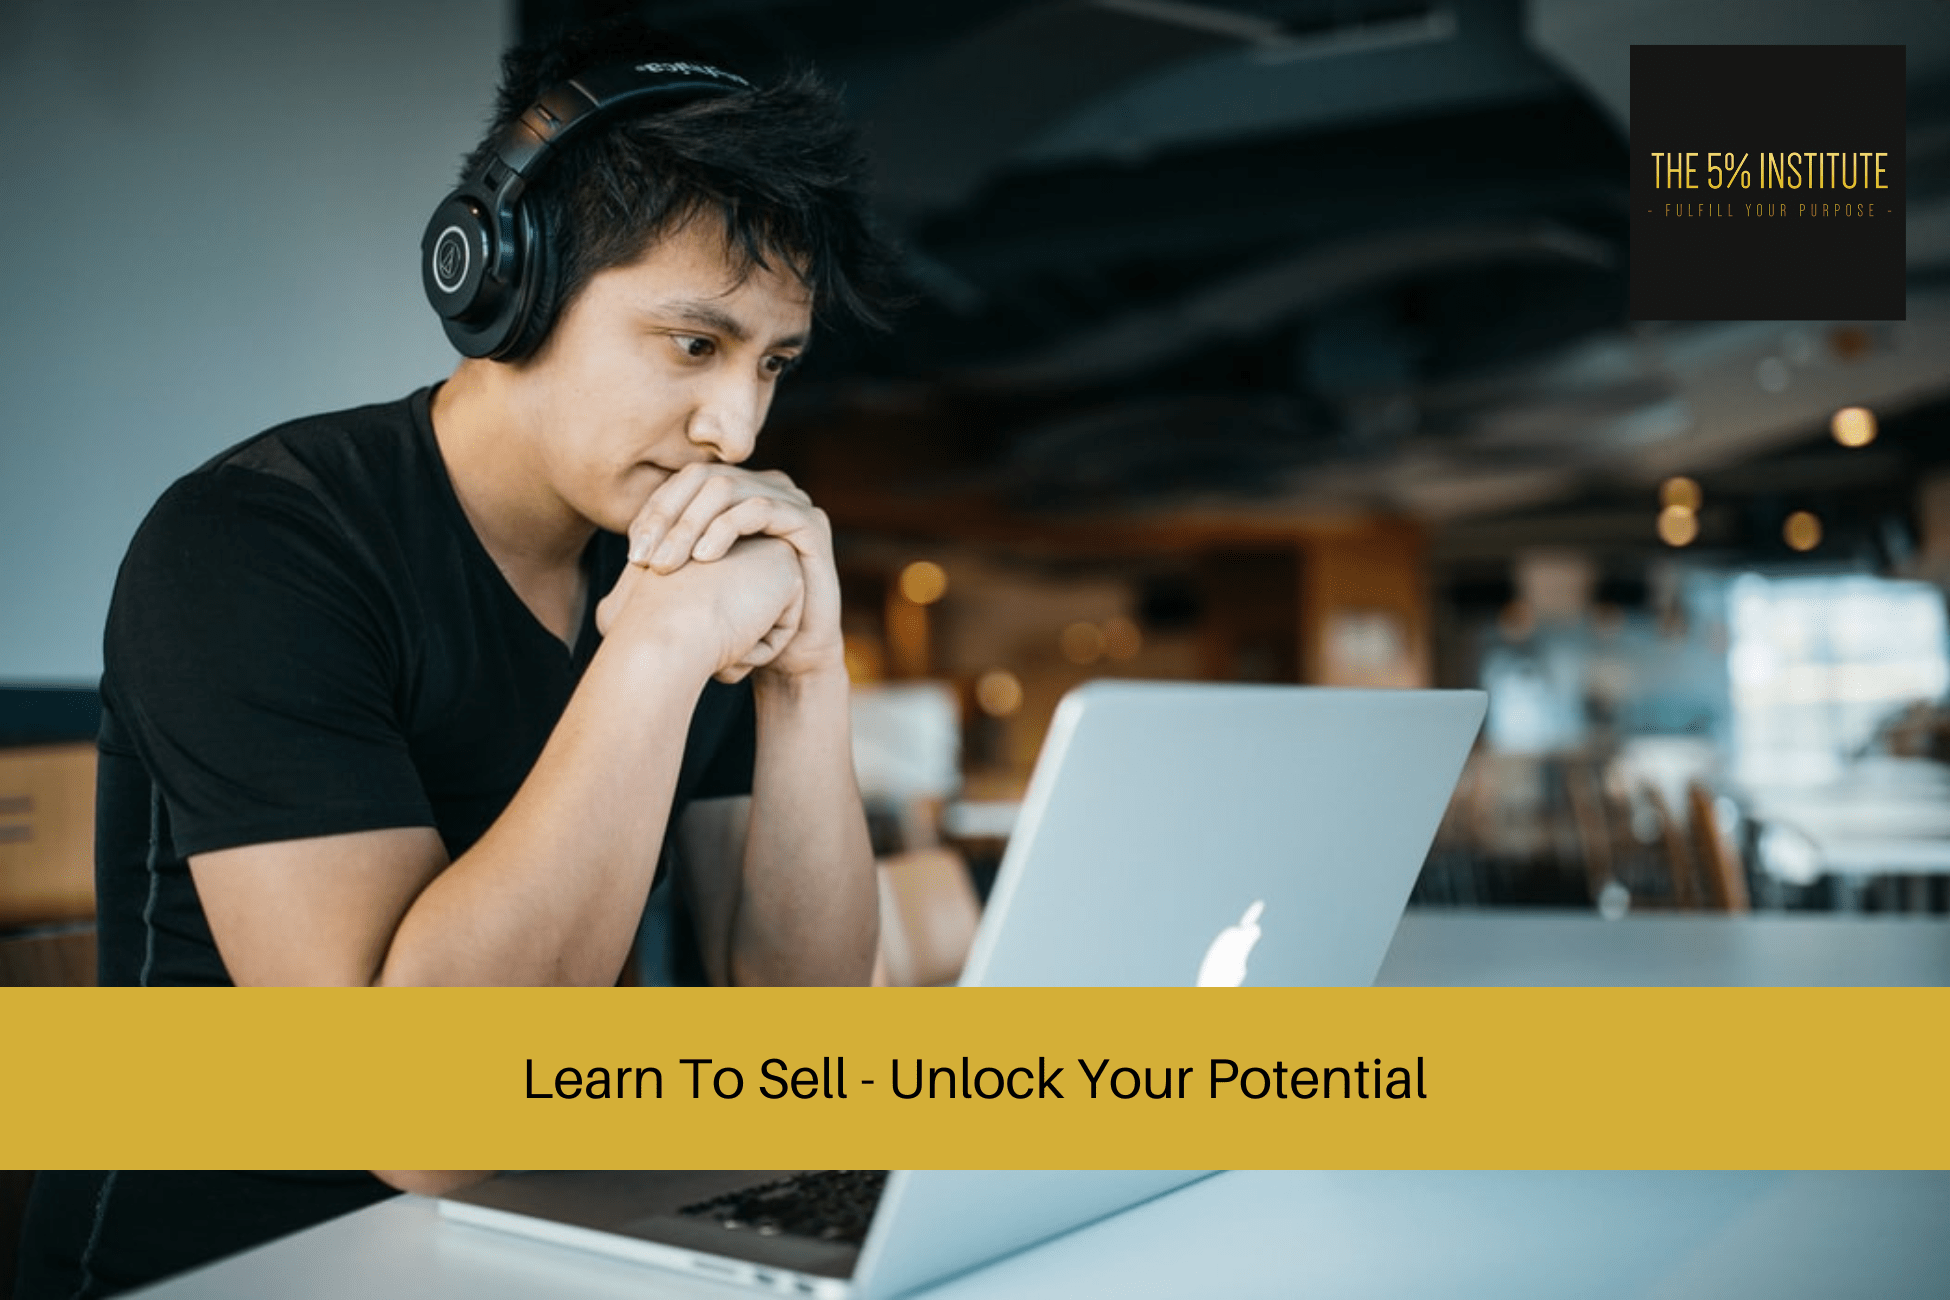 Learn To Sell - Unlock Your Potential